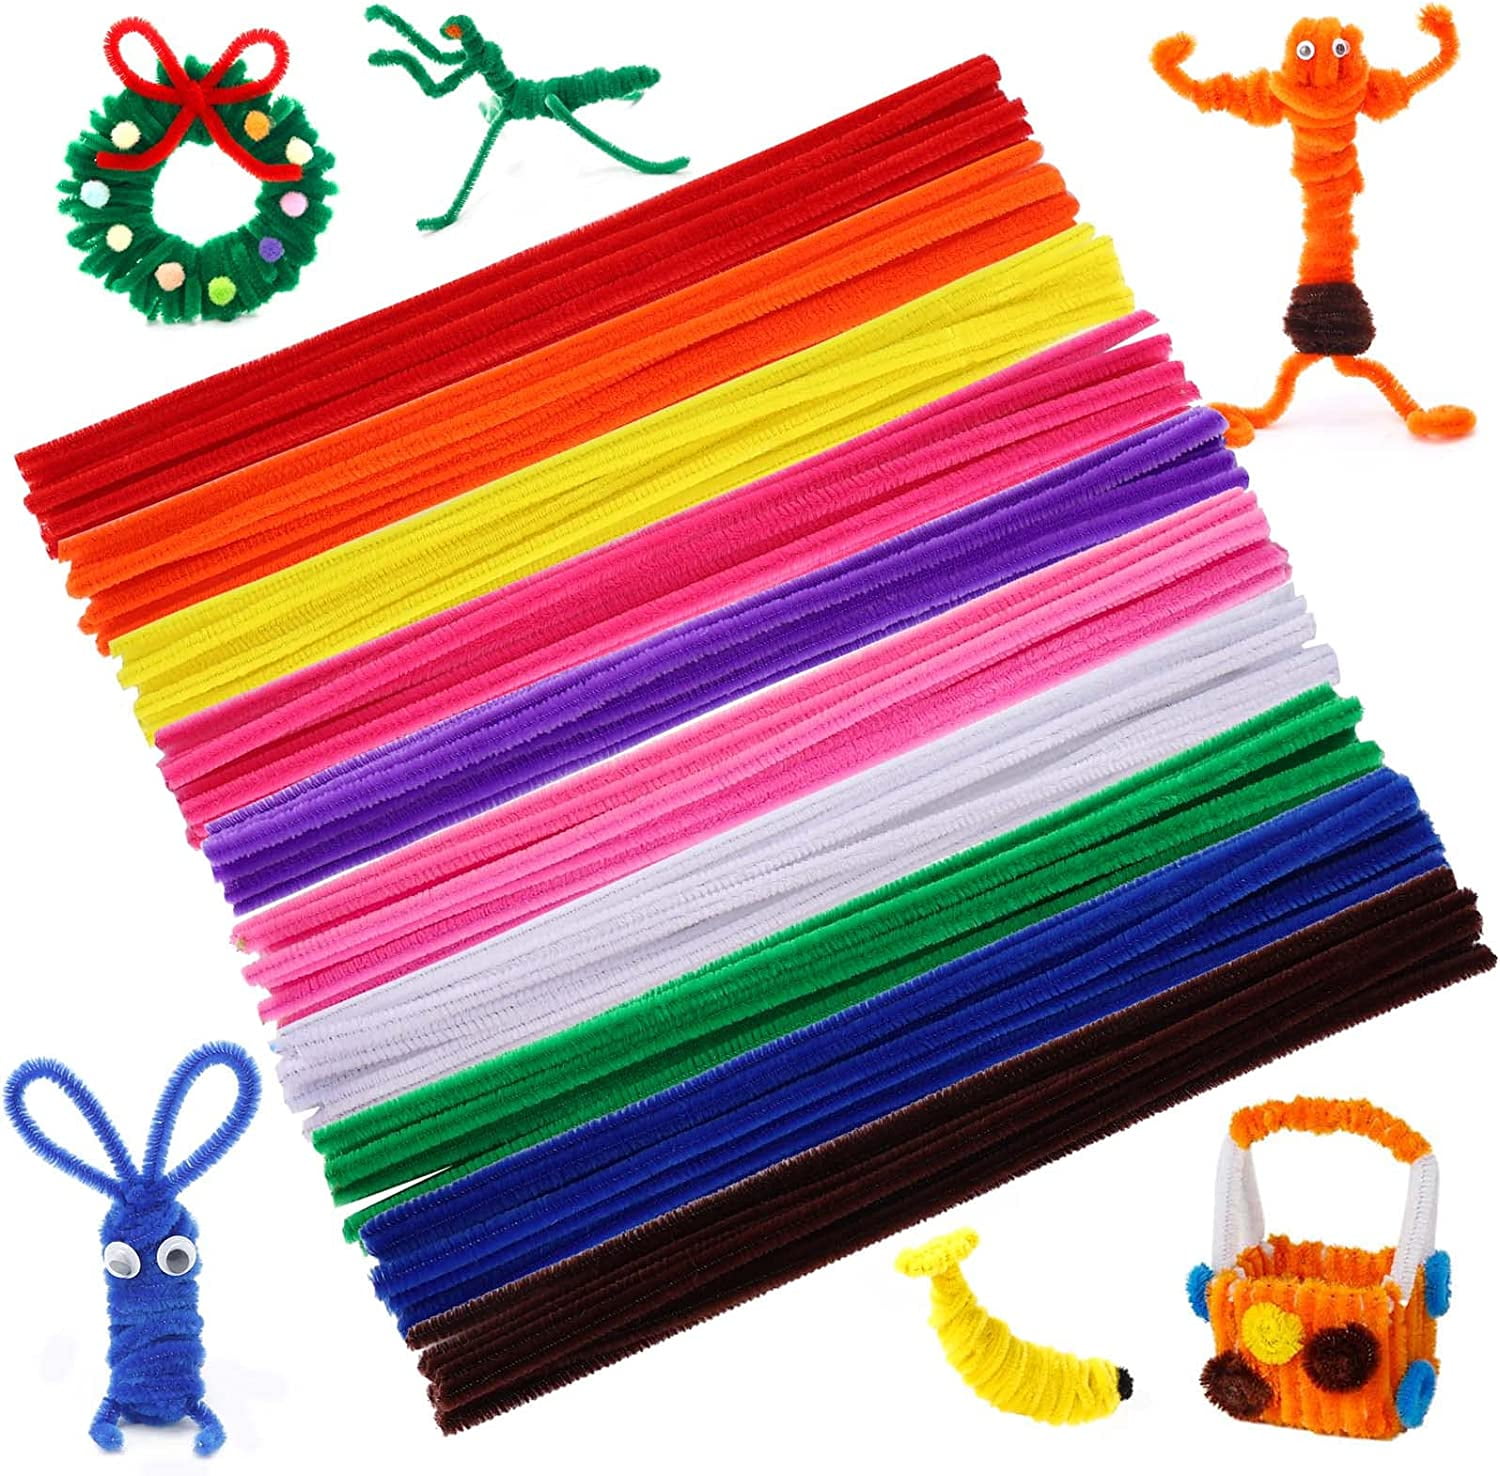  Newwiee 1000 Pcs Pipe Cleaners Bulk Chenille Stems Fuzzy  Sticks For Kids DIY Art Crafts Supplies Crafts Sticks Projects Creative  Home Decoration Birthday Valentines Day Party Favor